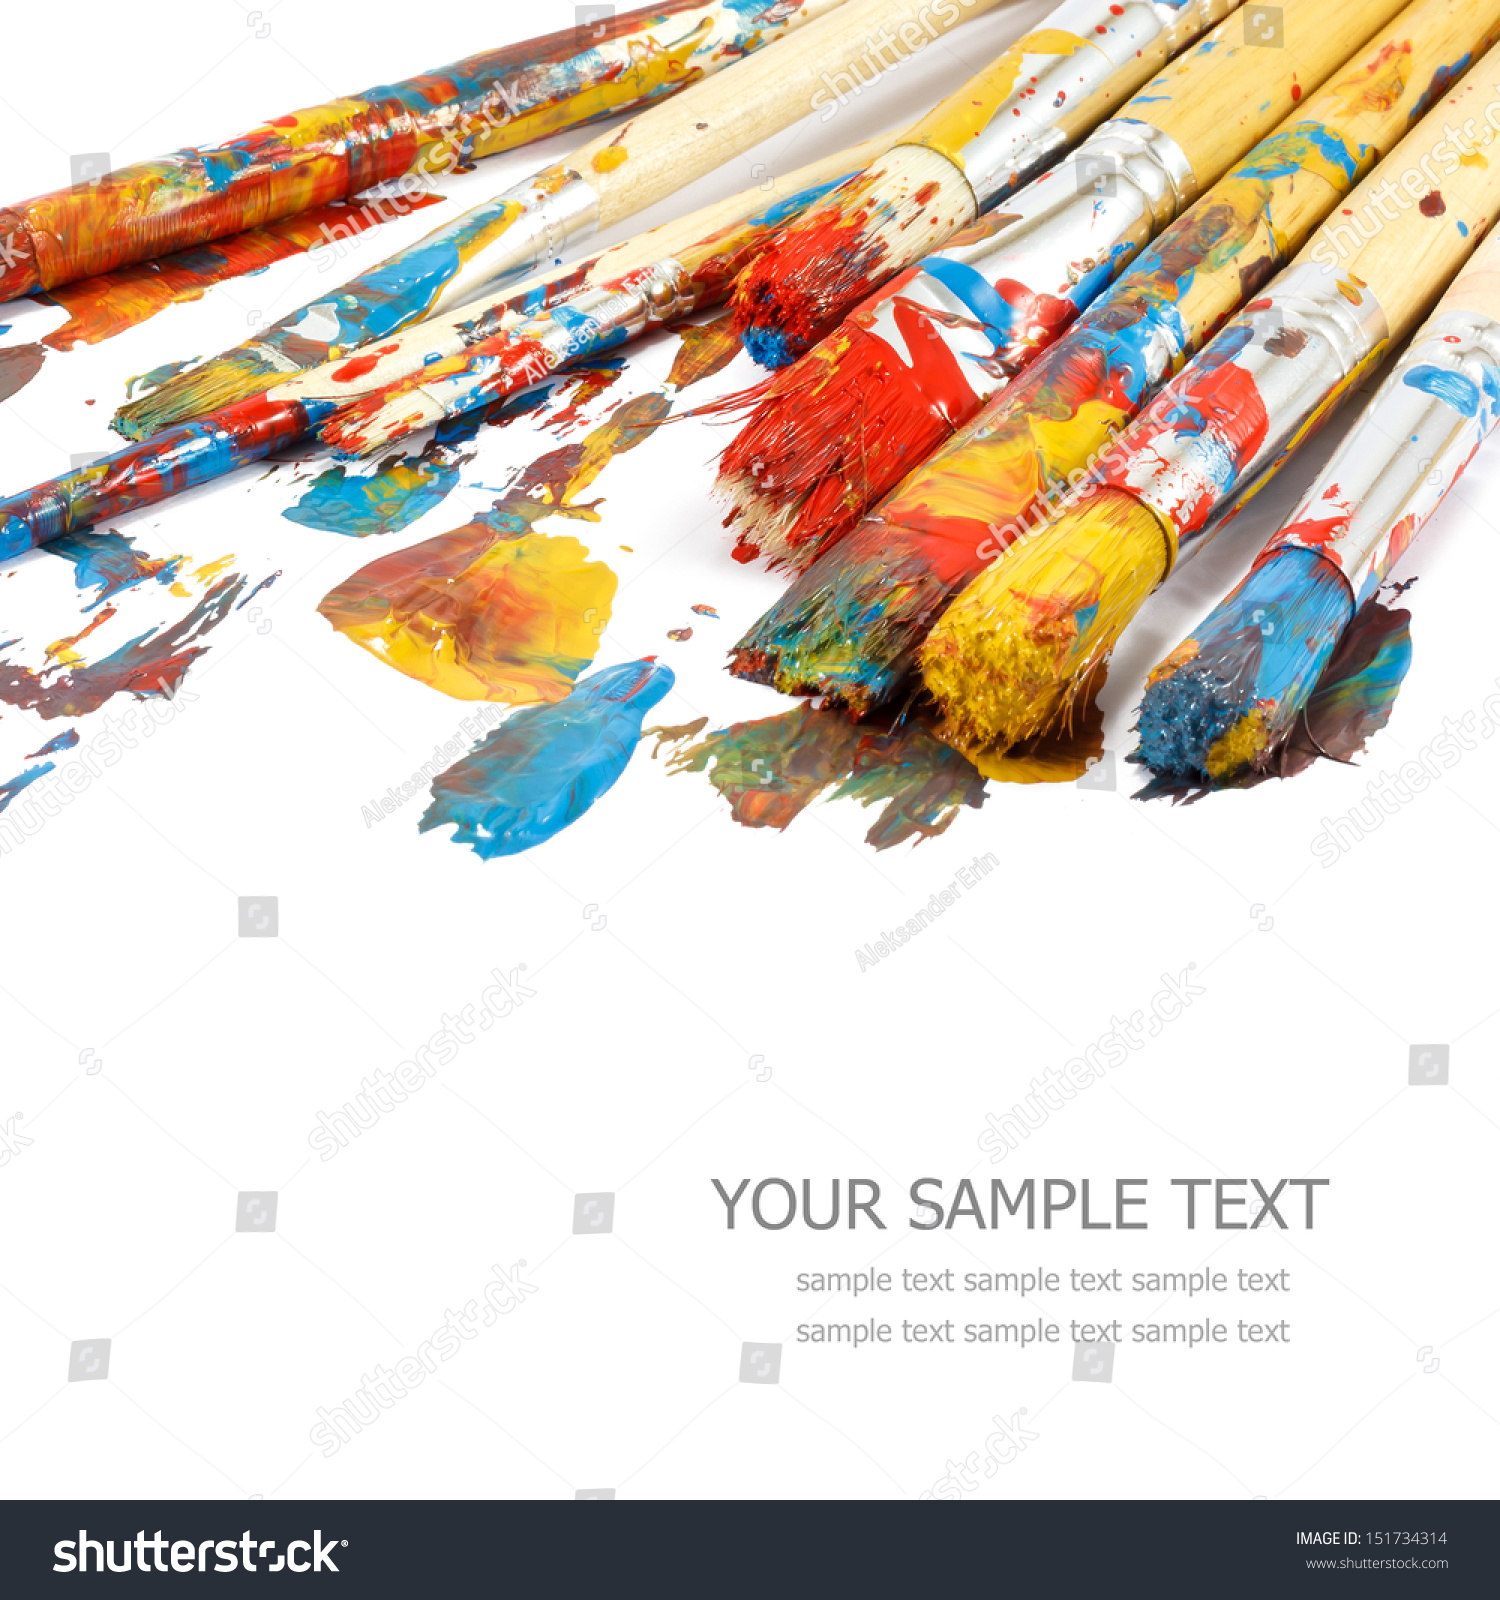 Colorful paints and artist brushes #151734314